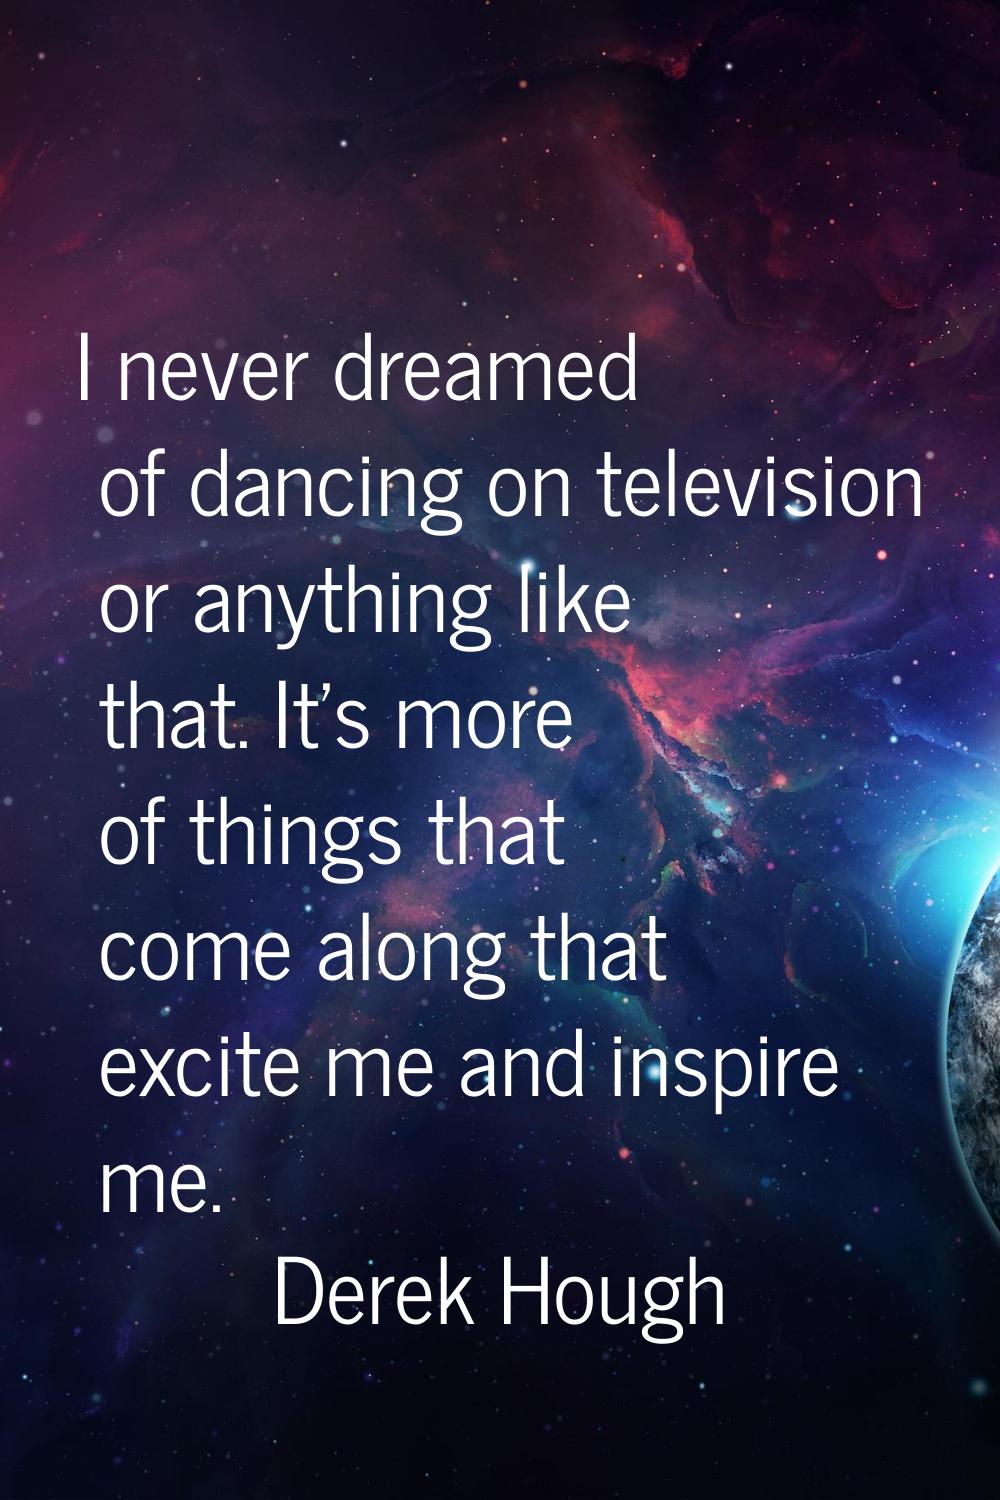 I never dreamed of dancing on television or anything like that. It's more of things that come along